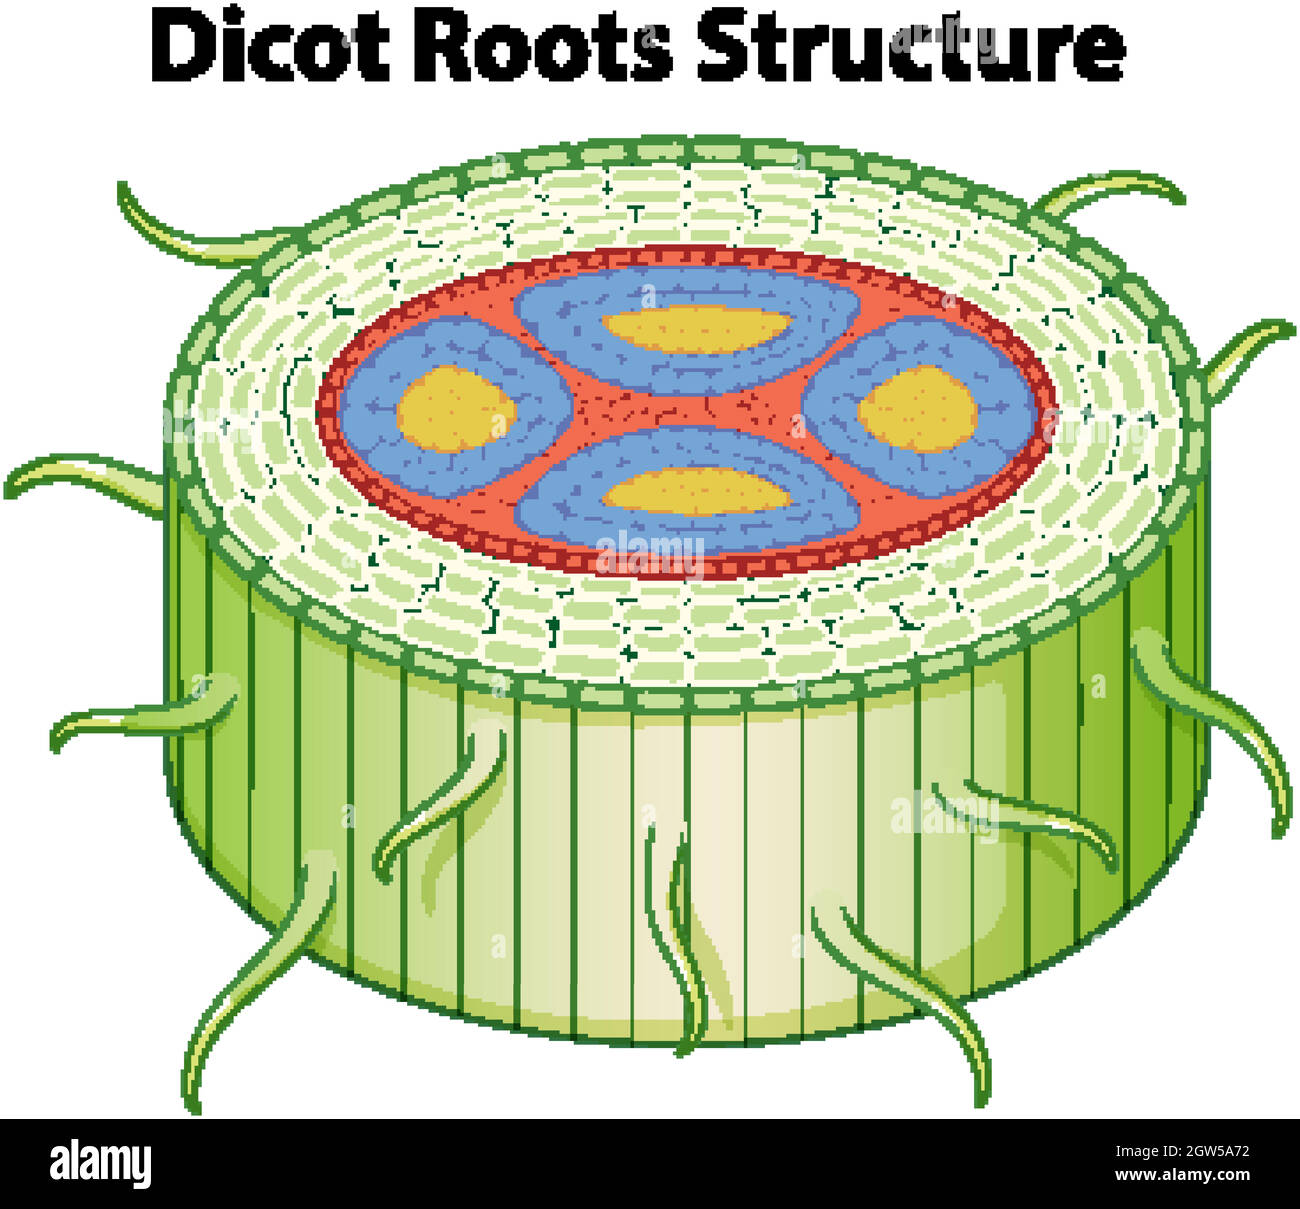 Diagram showing dicot roots structure Stock Vector